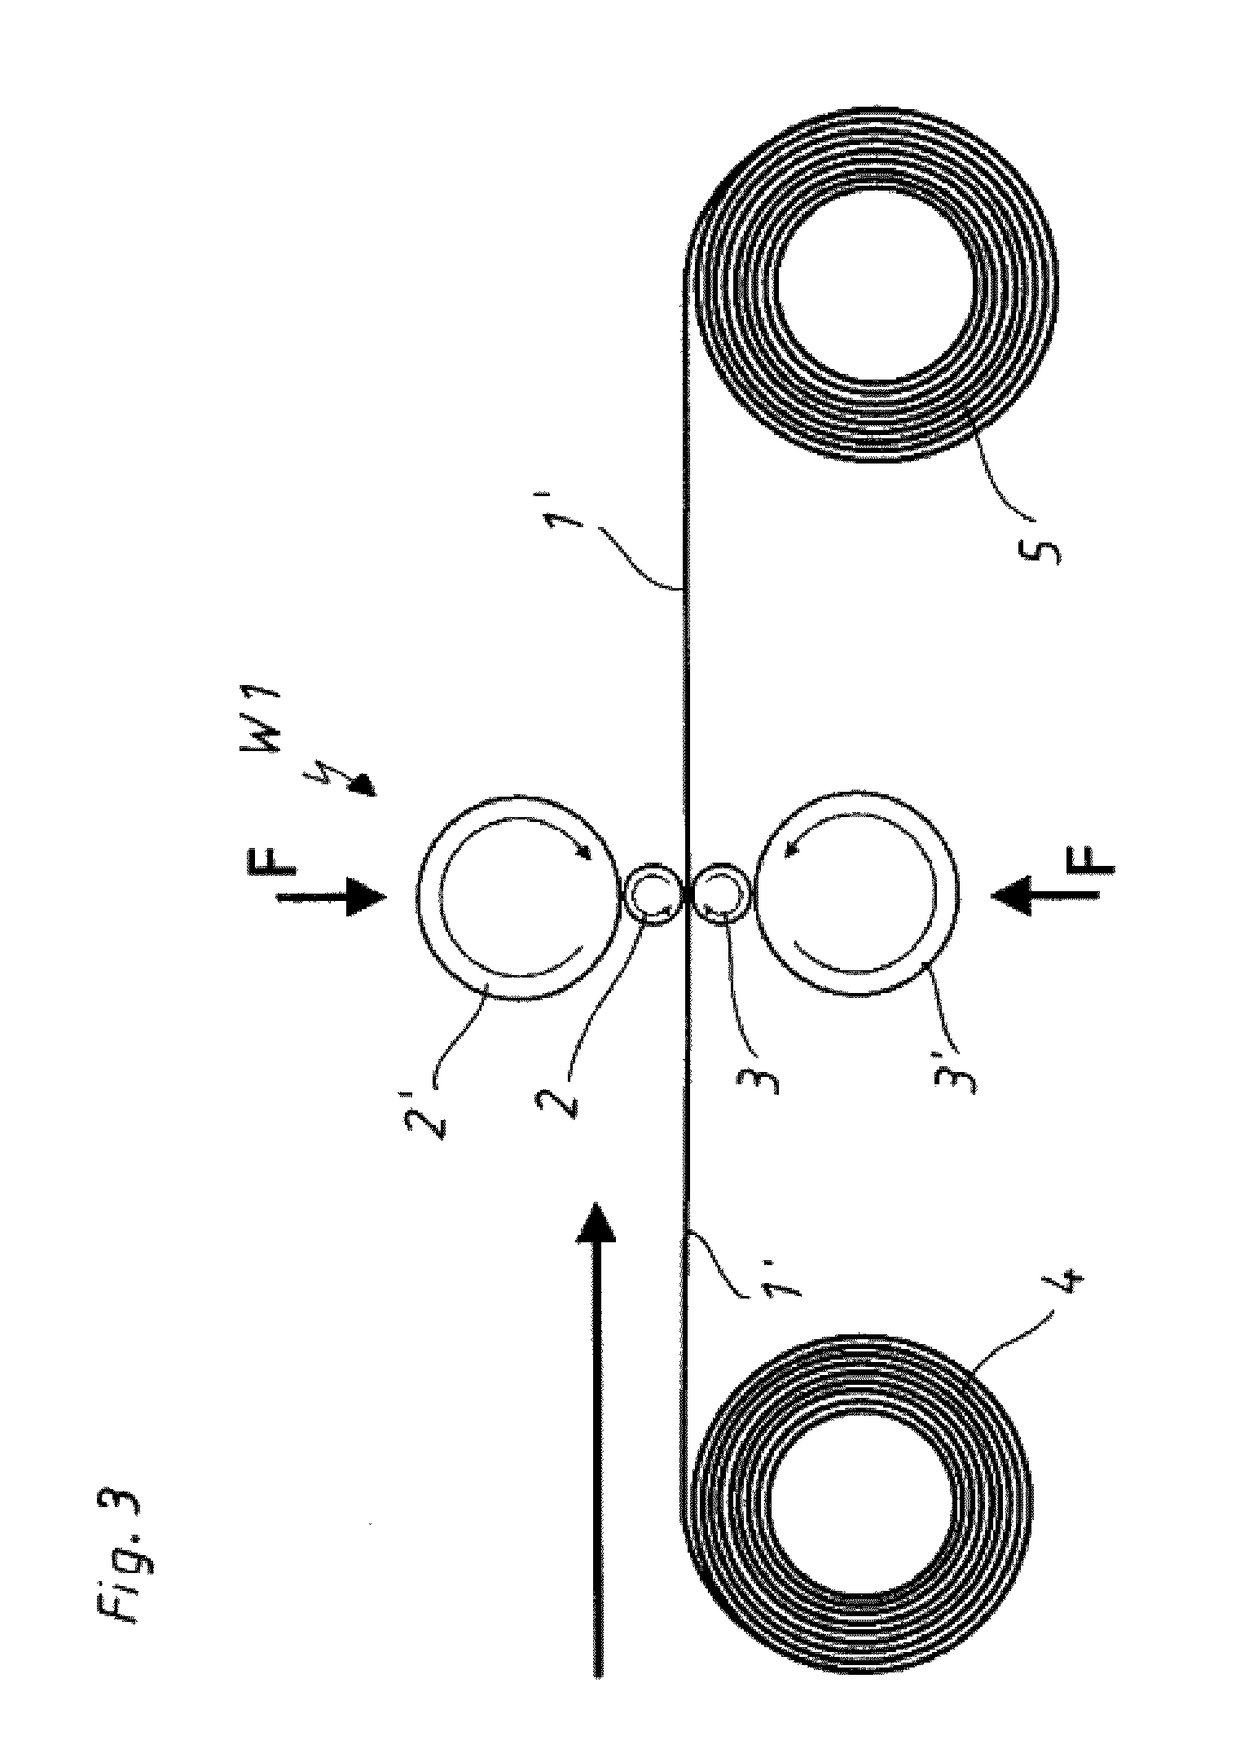 Method and device for manufacturing profiled metal strips